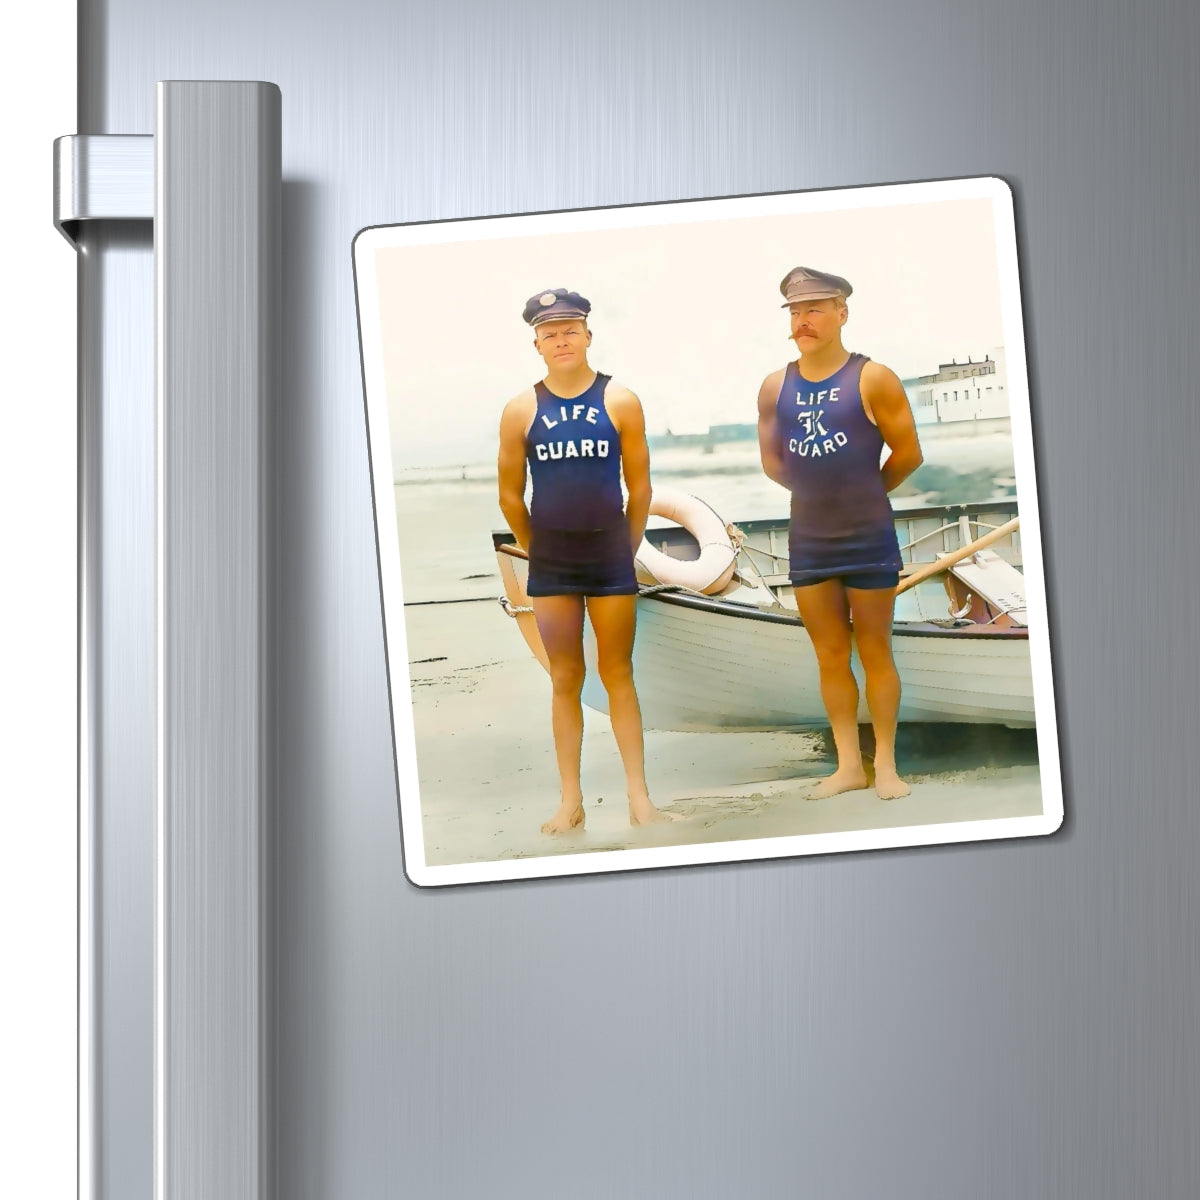 nager 016 | Magnets Vintage Lifeguard Lifeguards Gay Swim Suit Boat Lifesaving Queer LGBTQ